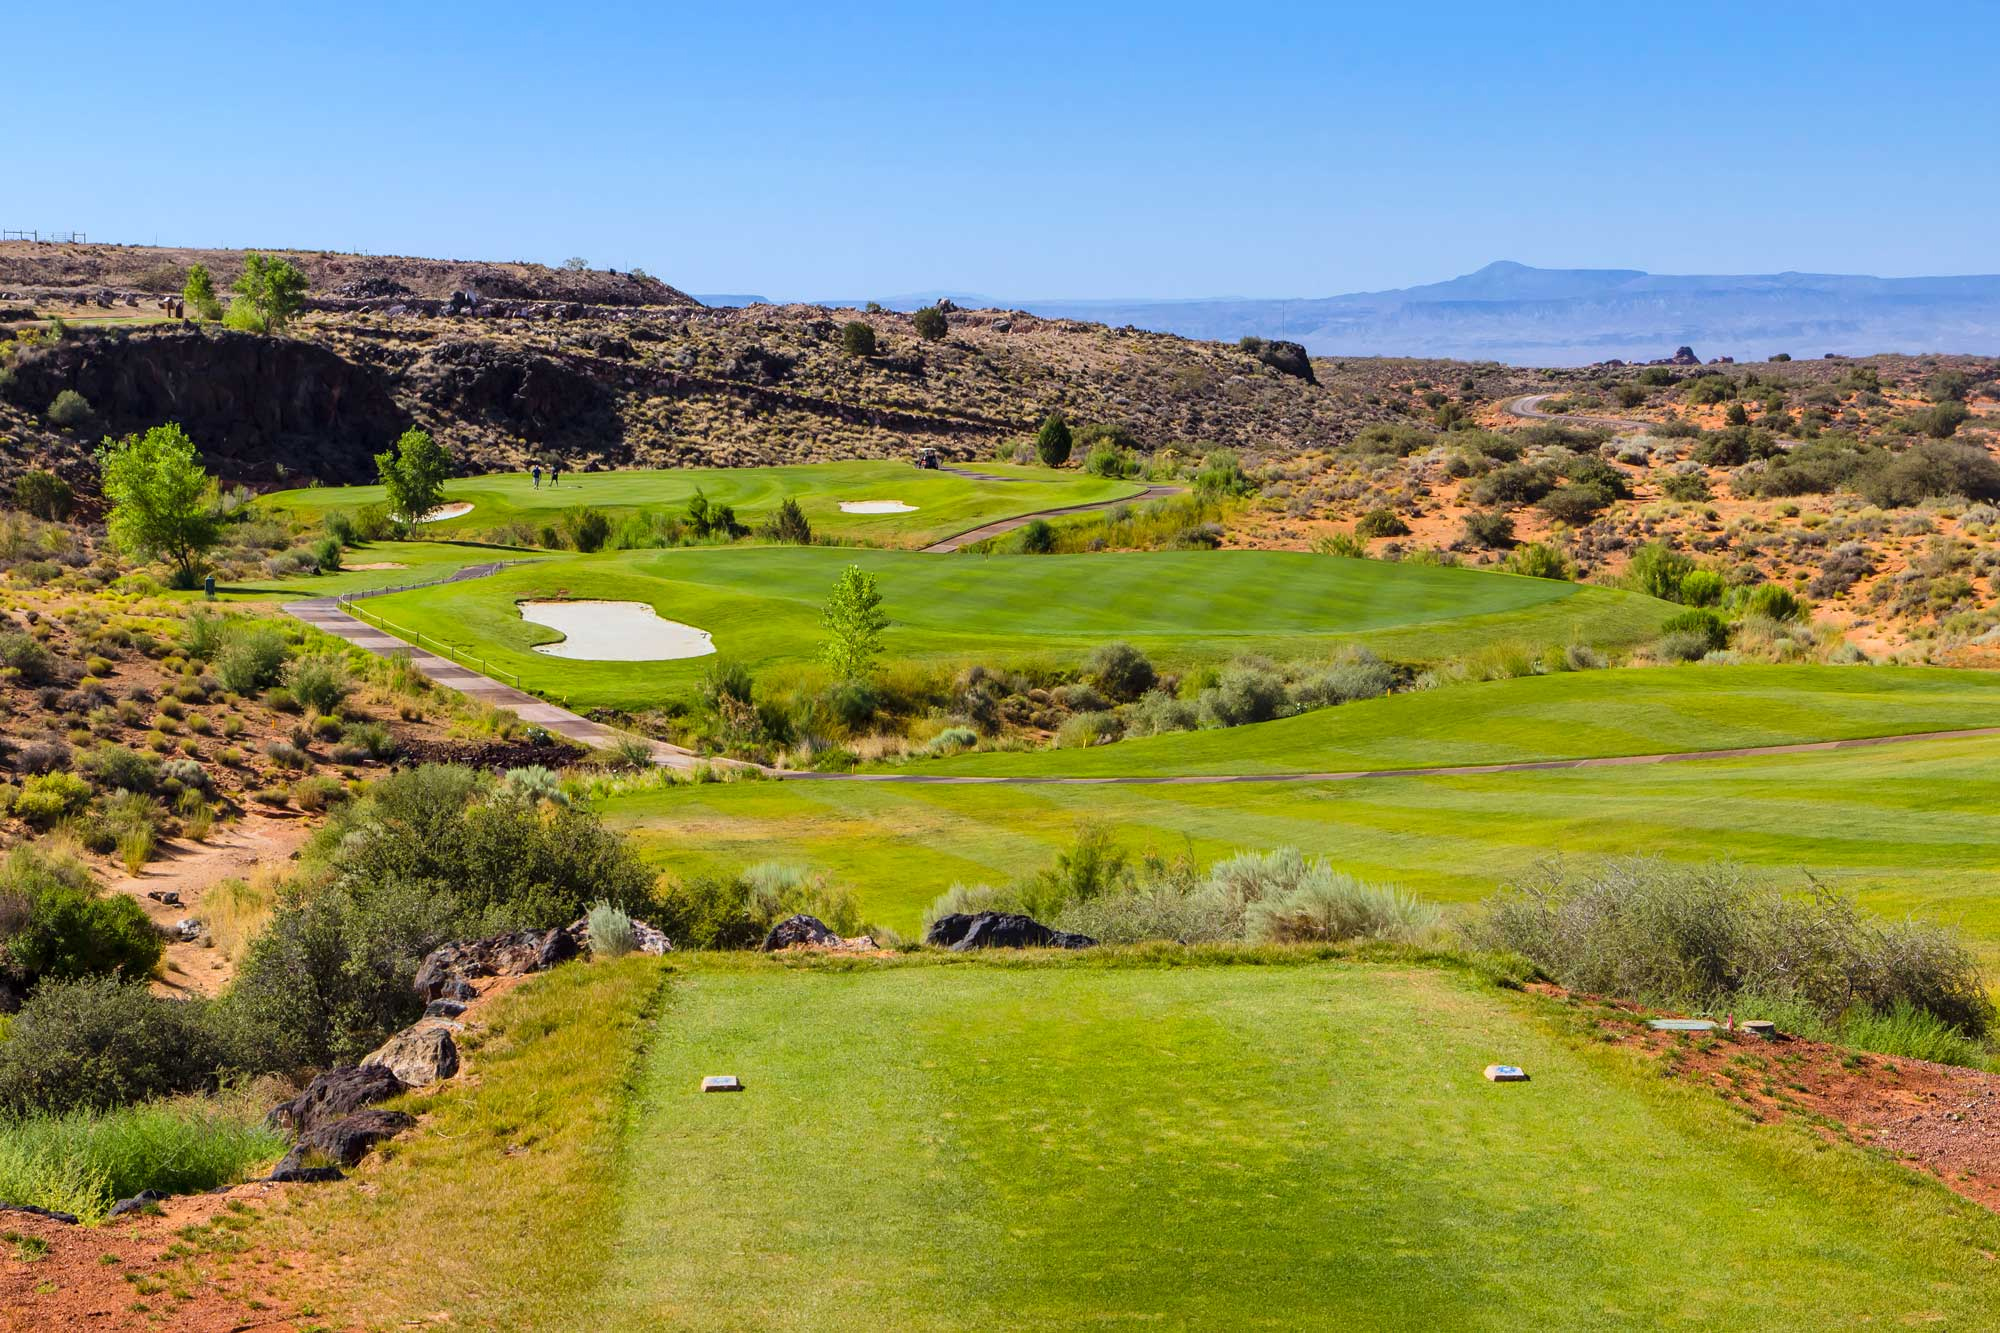 St. George golf courses - Clublender